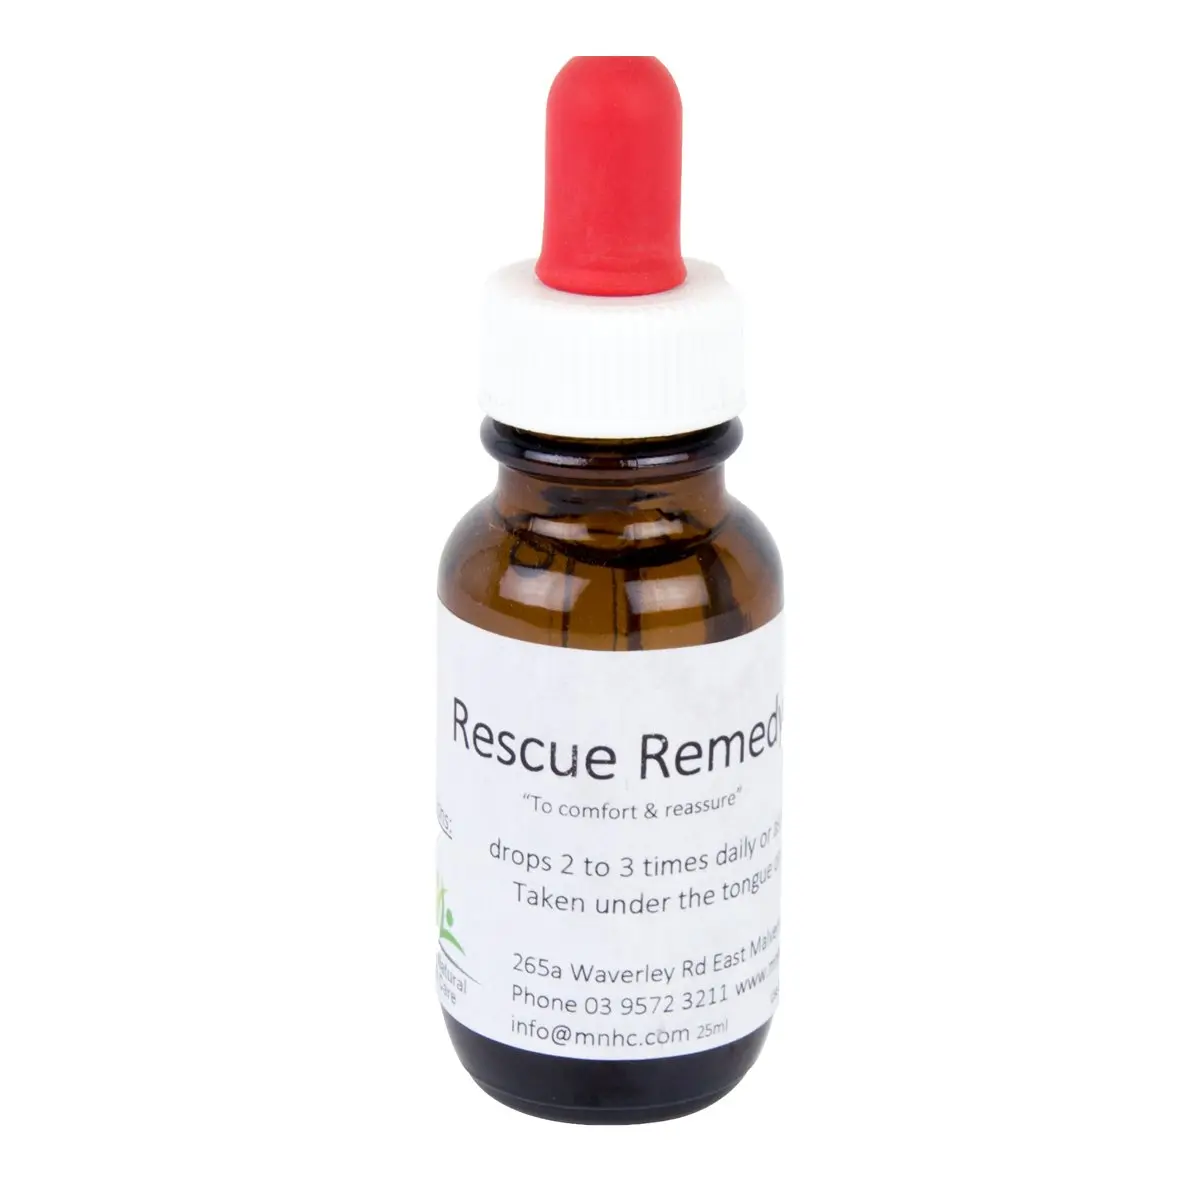 Remedy Bach Rescue: The Secret Weapon against Anxiety